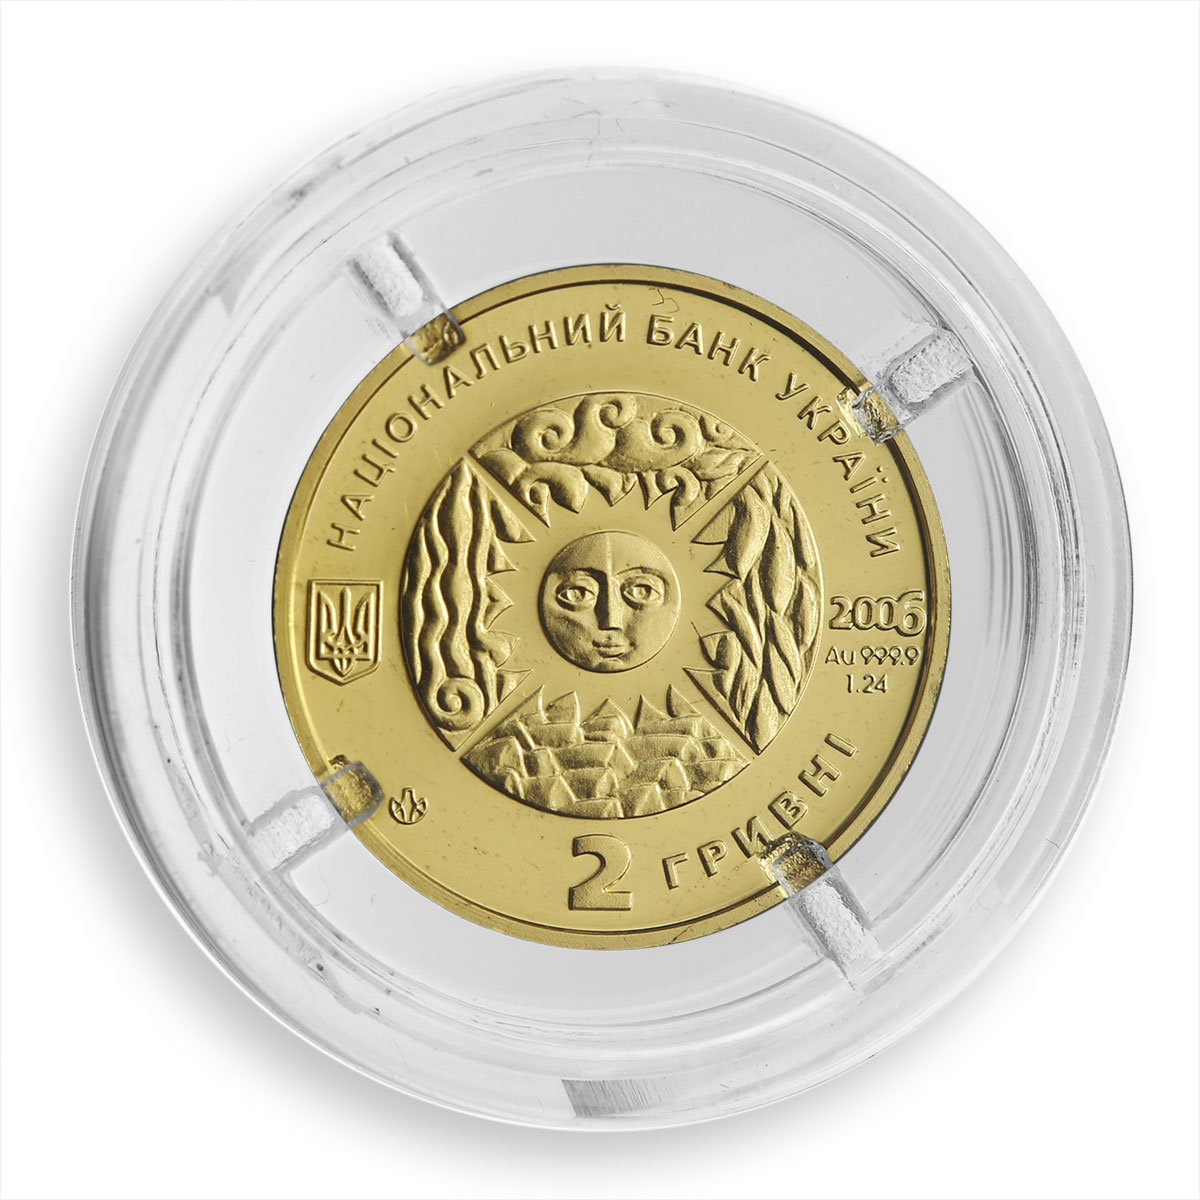 Ukraine 2 hryvnas Signs of the Zodiac Aries gold coin 2006